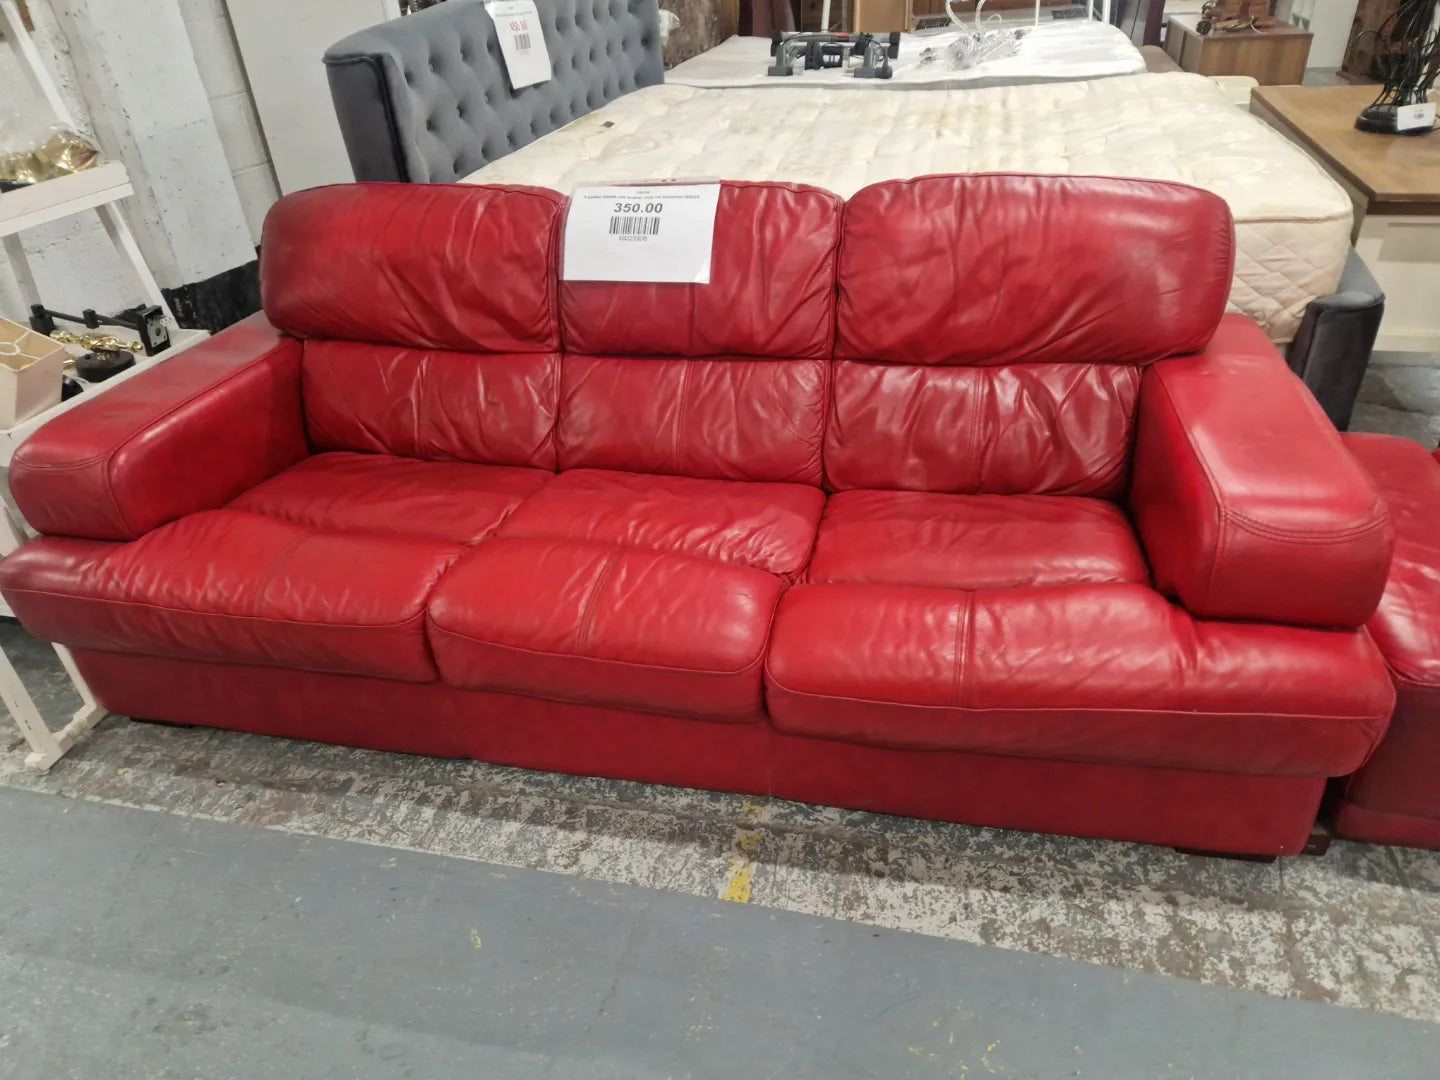 3 seater DARK red leather sofa cw footstool